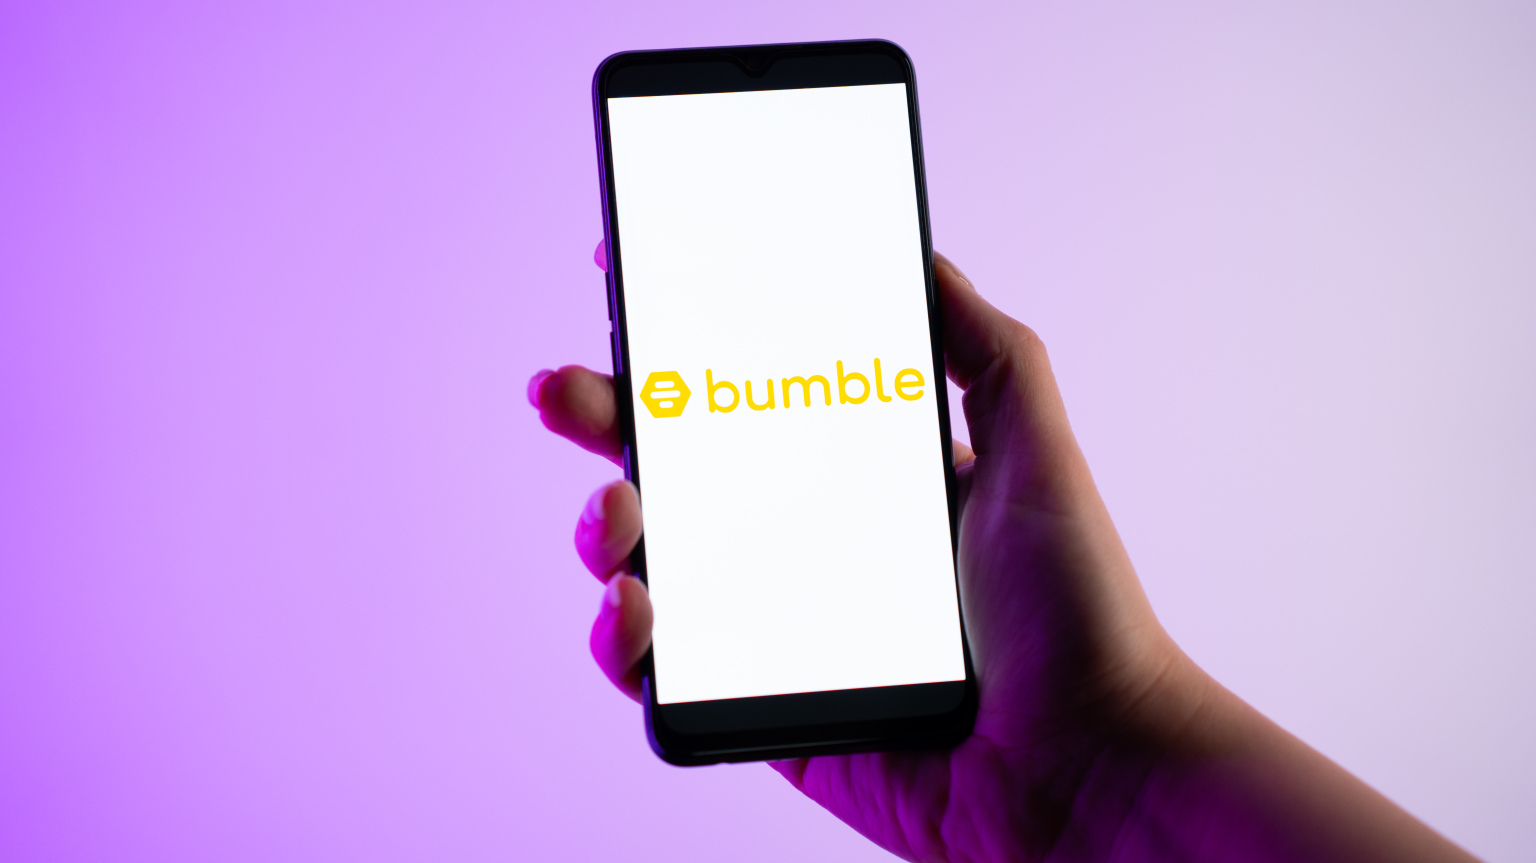 A person is holding a mobile phone with the Bumble dating app logo on its screen